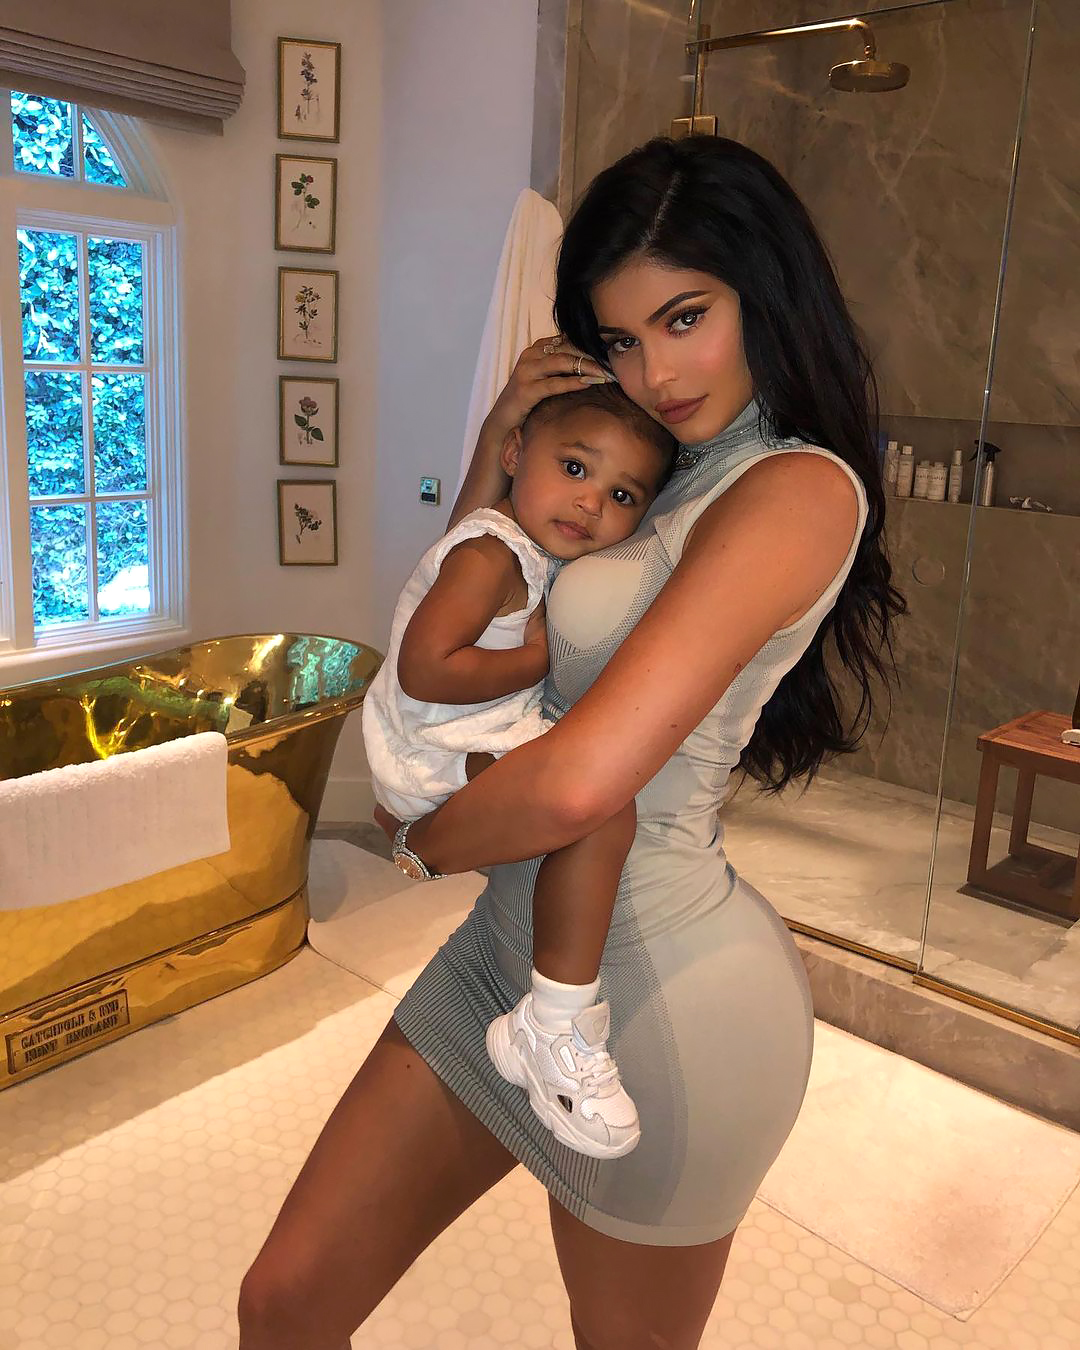 Kylie Jenner’s Quotes Over the Years About Wanting More Kids